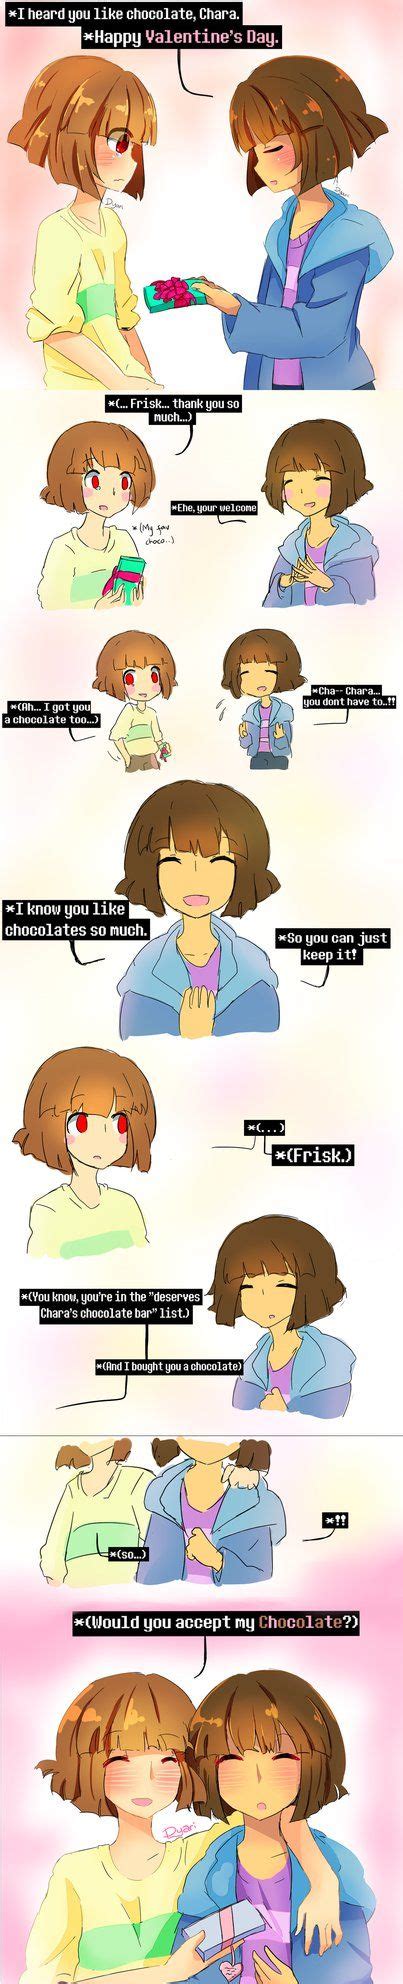 undertale charisk on the air by aremialtaria san on